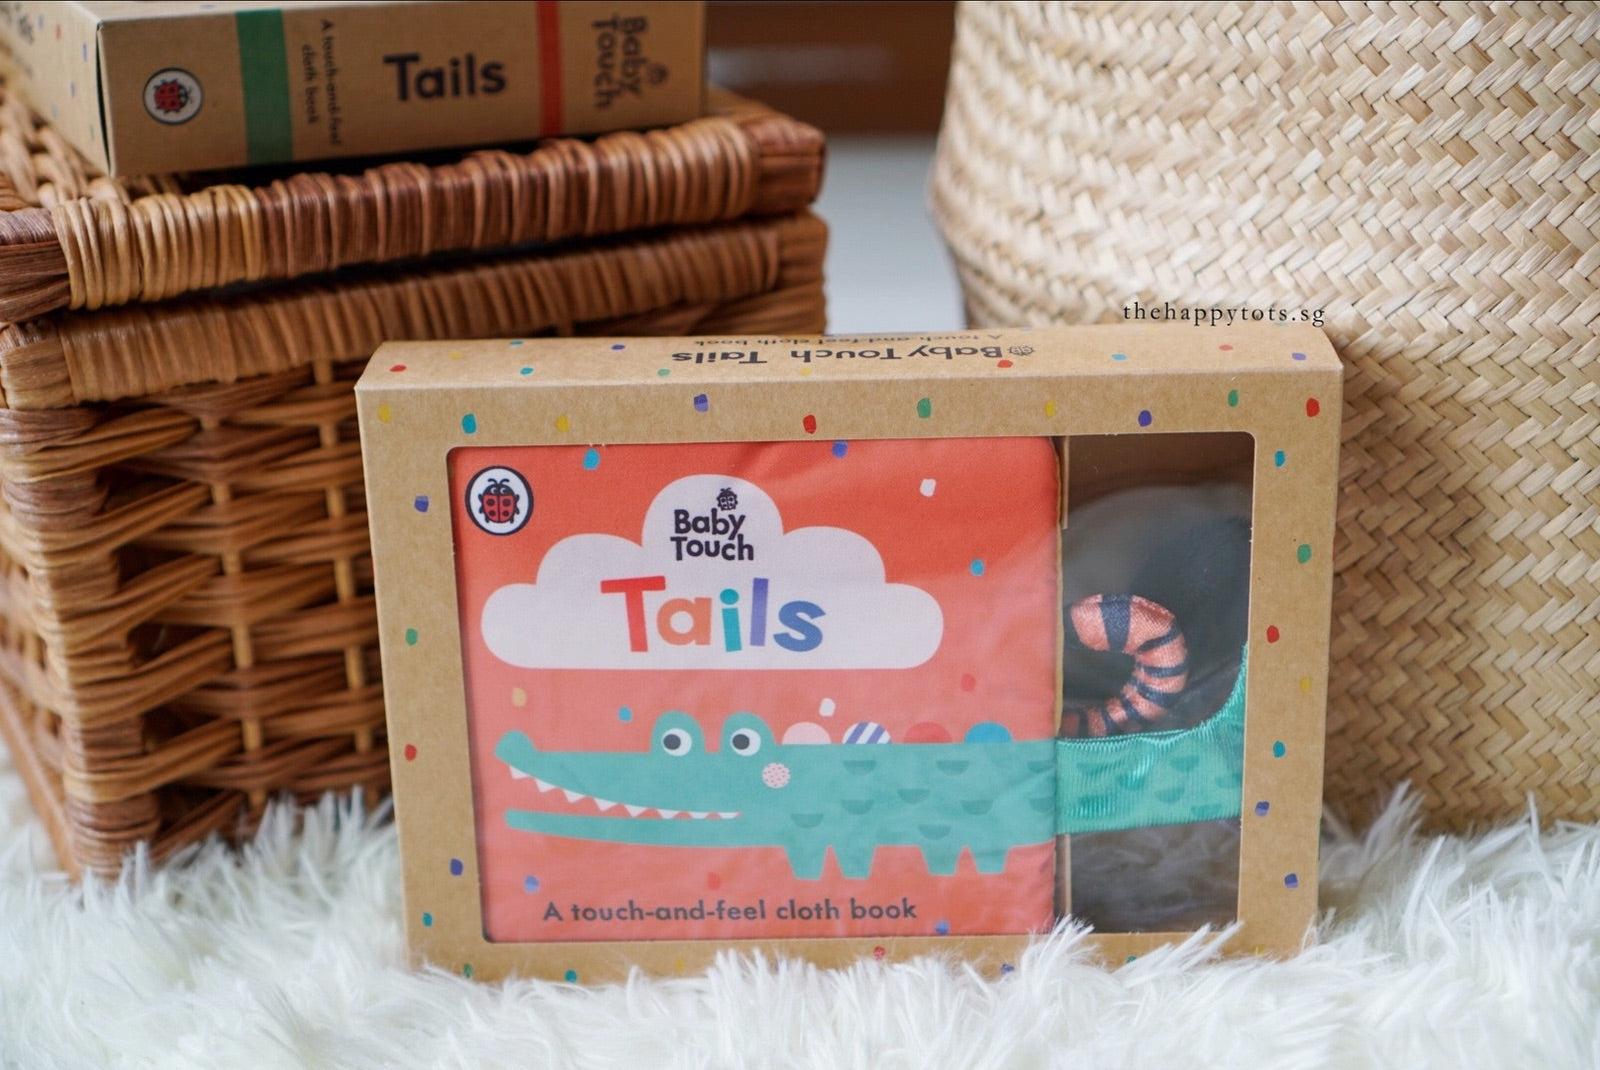 baby touch tails: a touch-and-feel cloth books for babies